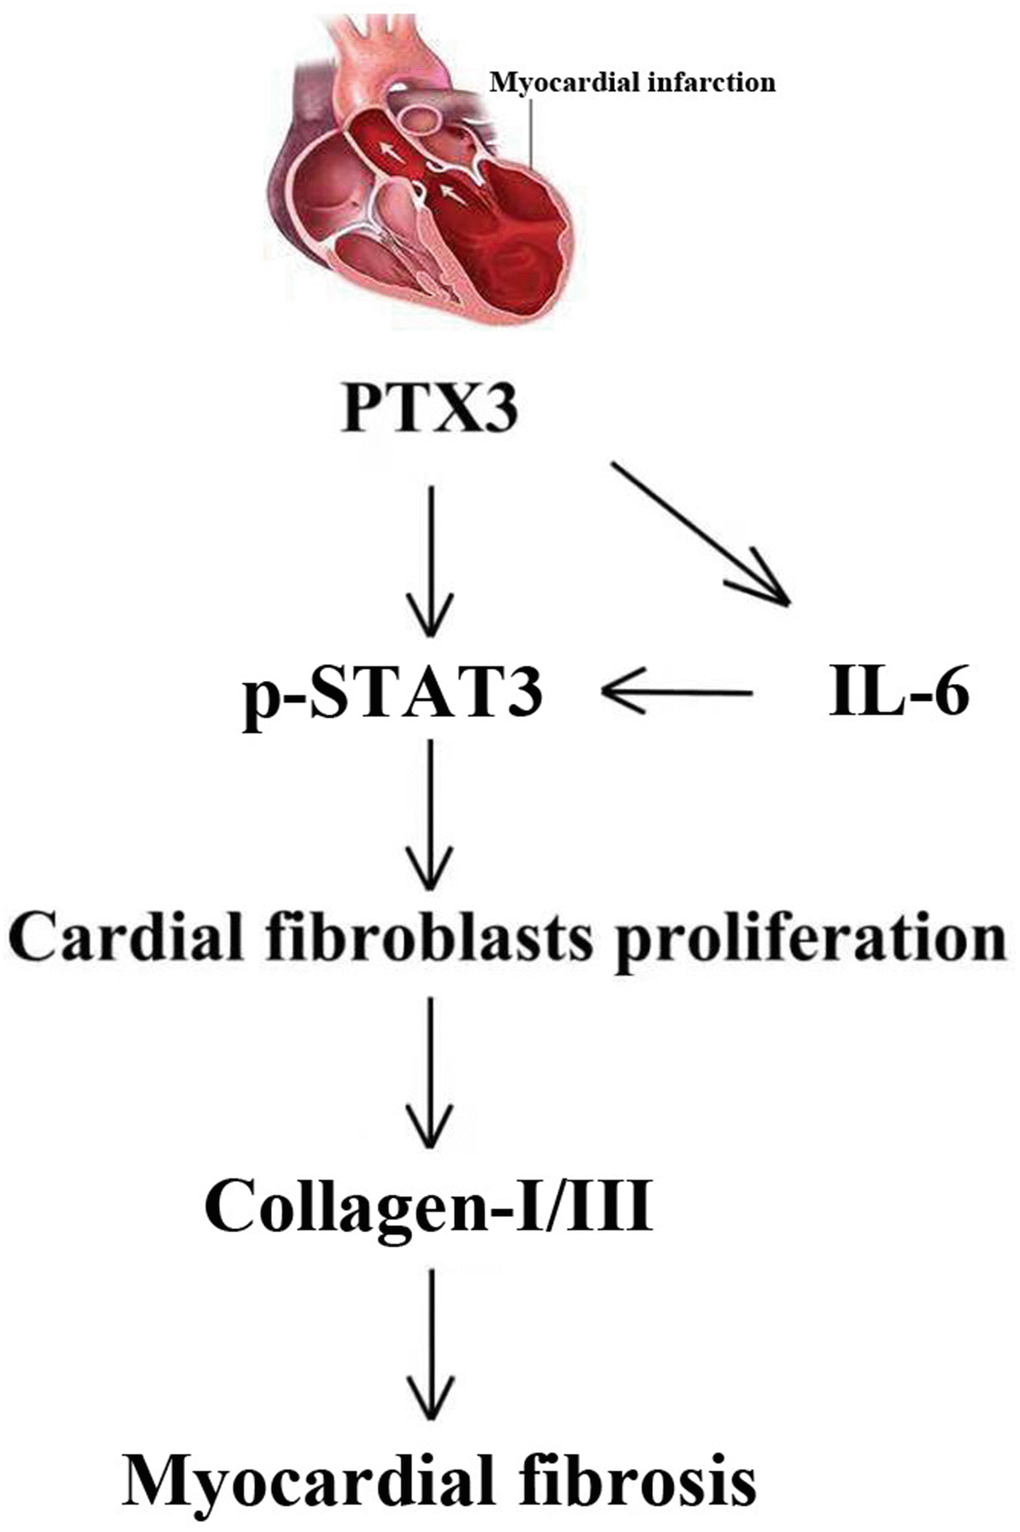 The mechanisms of PTX3 in myocardial fibrosis were shown schematically.